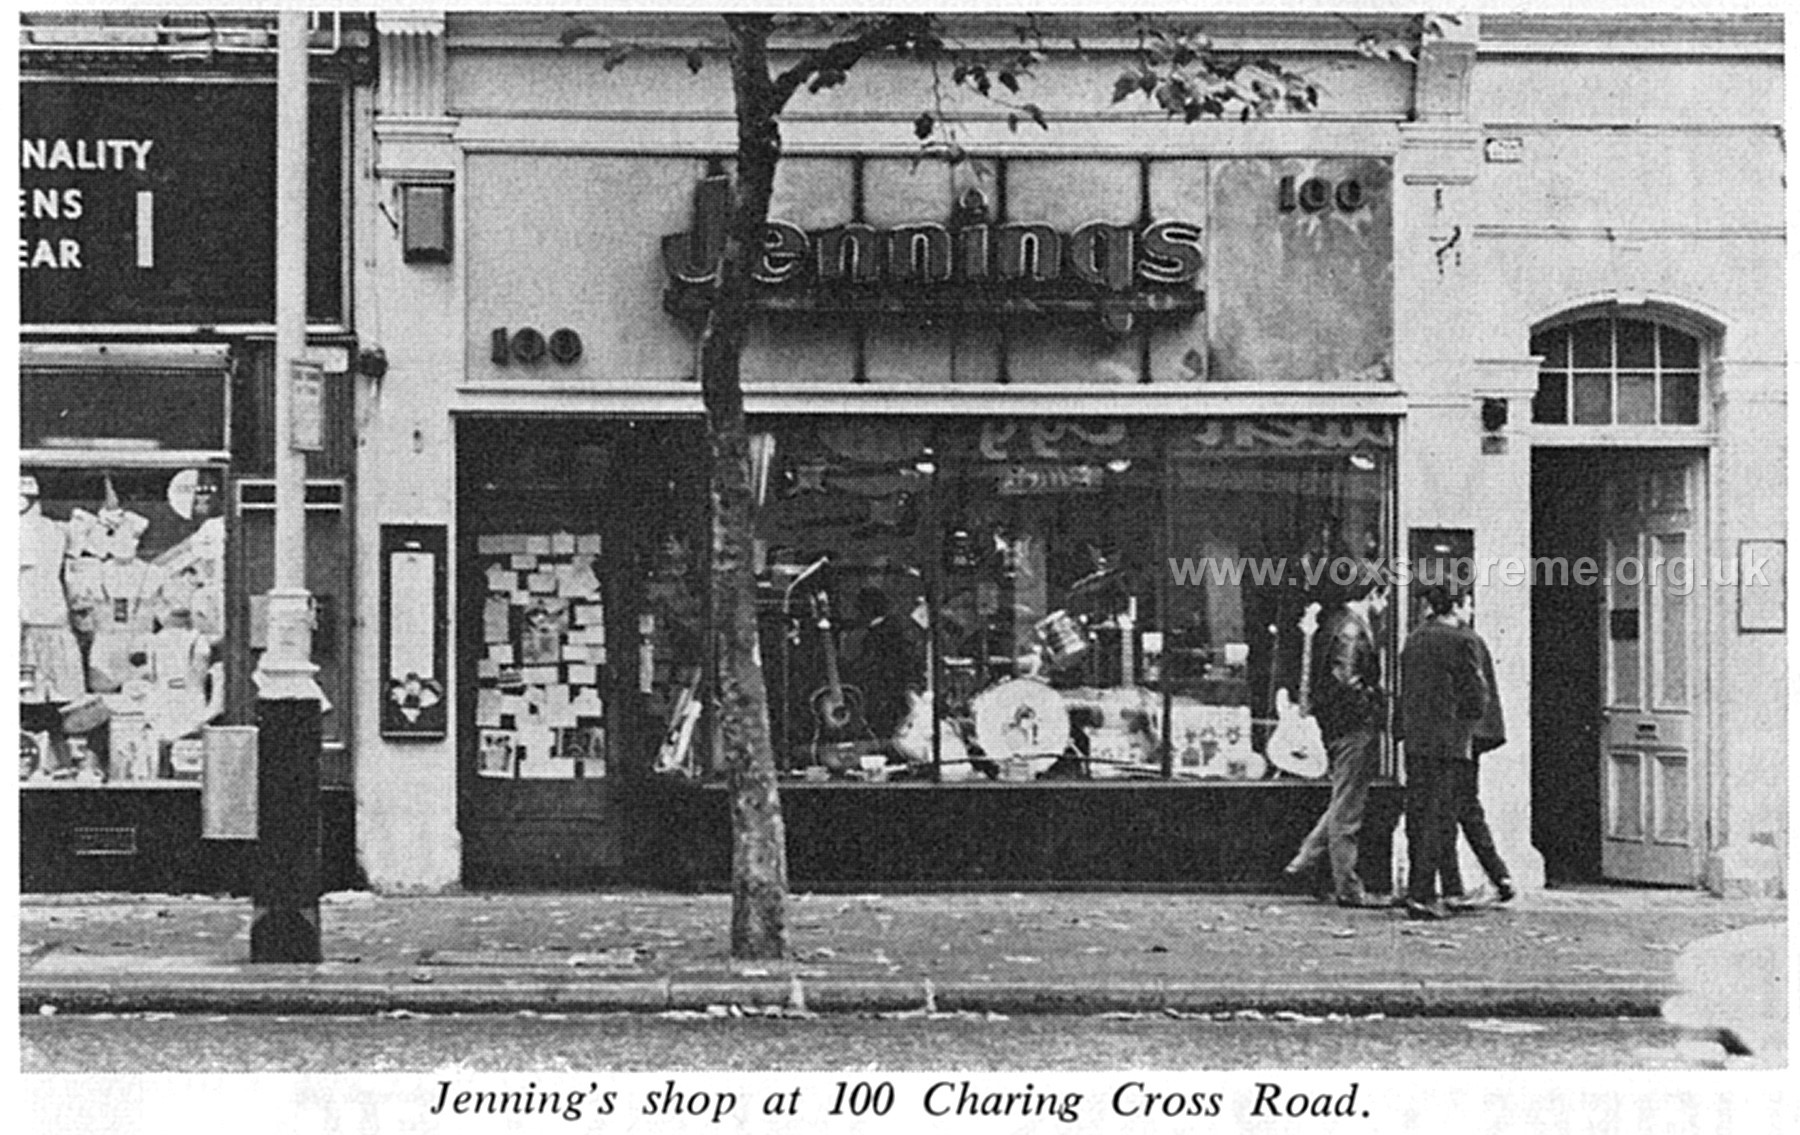 Beat Instrumental magazine, February 1967, the Jennings shop on 100 Charing Cross Road, bought by Macaris